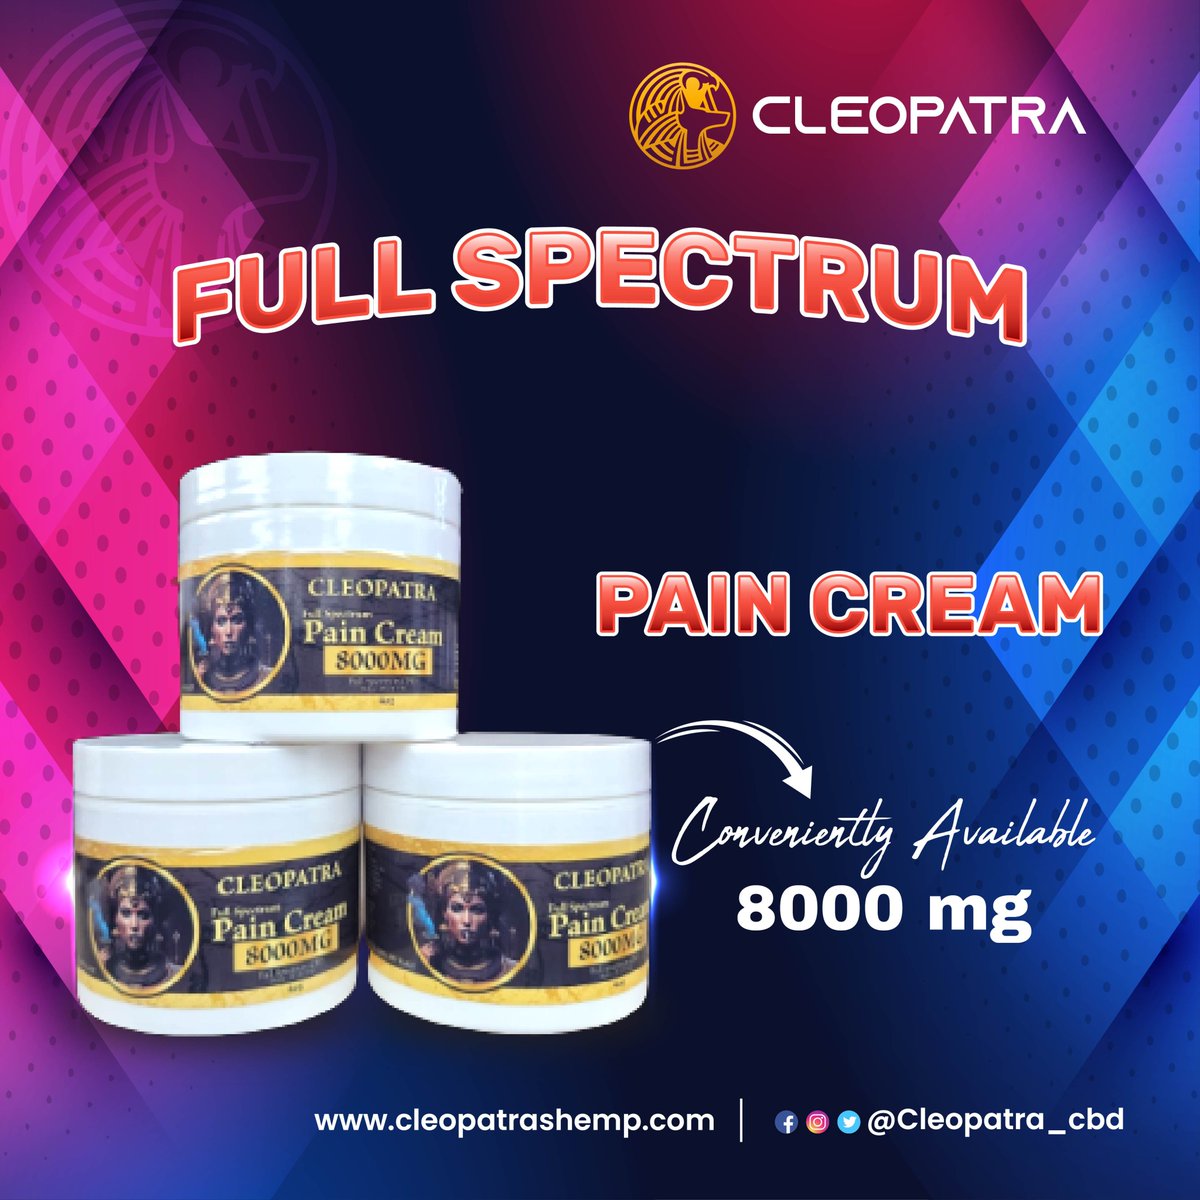 Discover Lasting Relief with Cleopatra's Full Spectrum Pain Cream - Embrace Wellness, Embrace Life!
Relieve, Restore & Rejoice!
#NaturalPainRelief #CleopatraComfort #AncientWisdomModernRelief #FullSpectrumHealing
#PainFreeJourney #SootheAndRestore #CleopatrasSecret